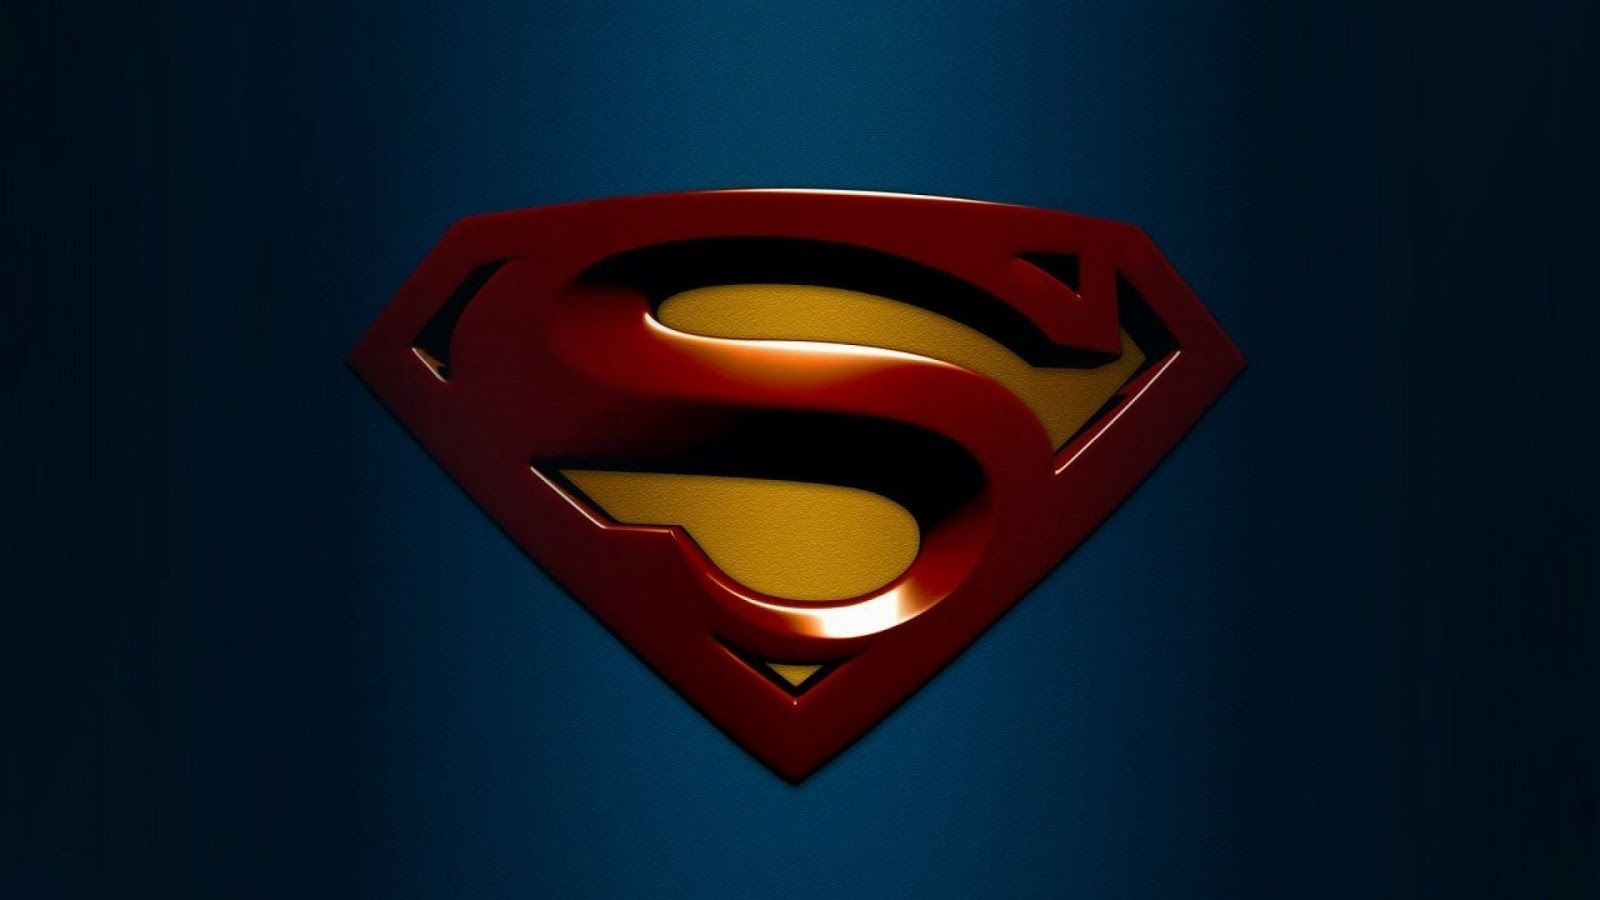  Superman Logo Wallpaper Images amp Pictures Becuo